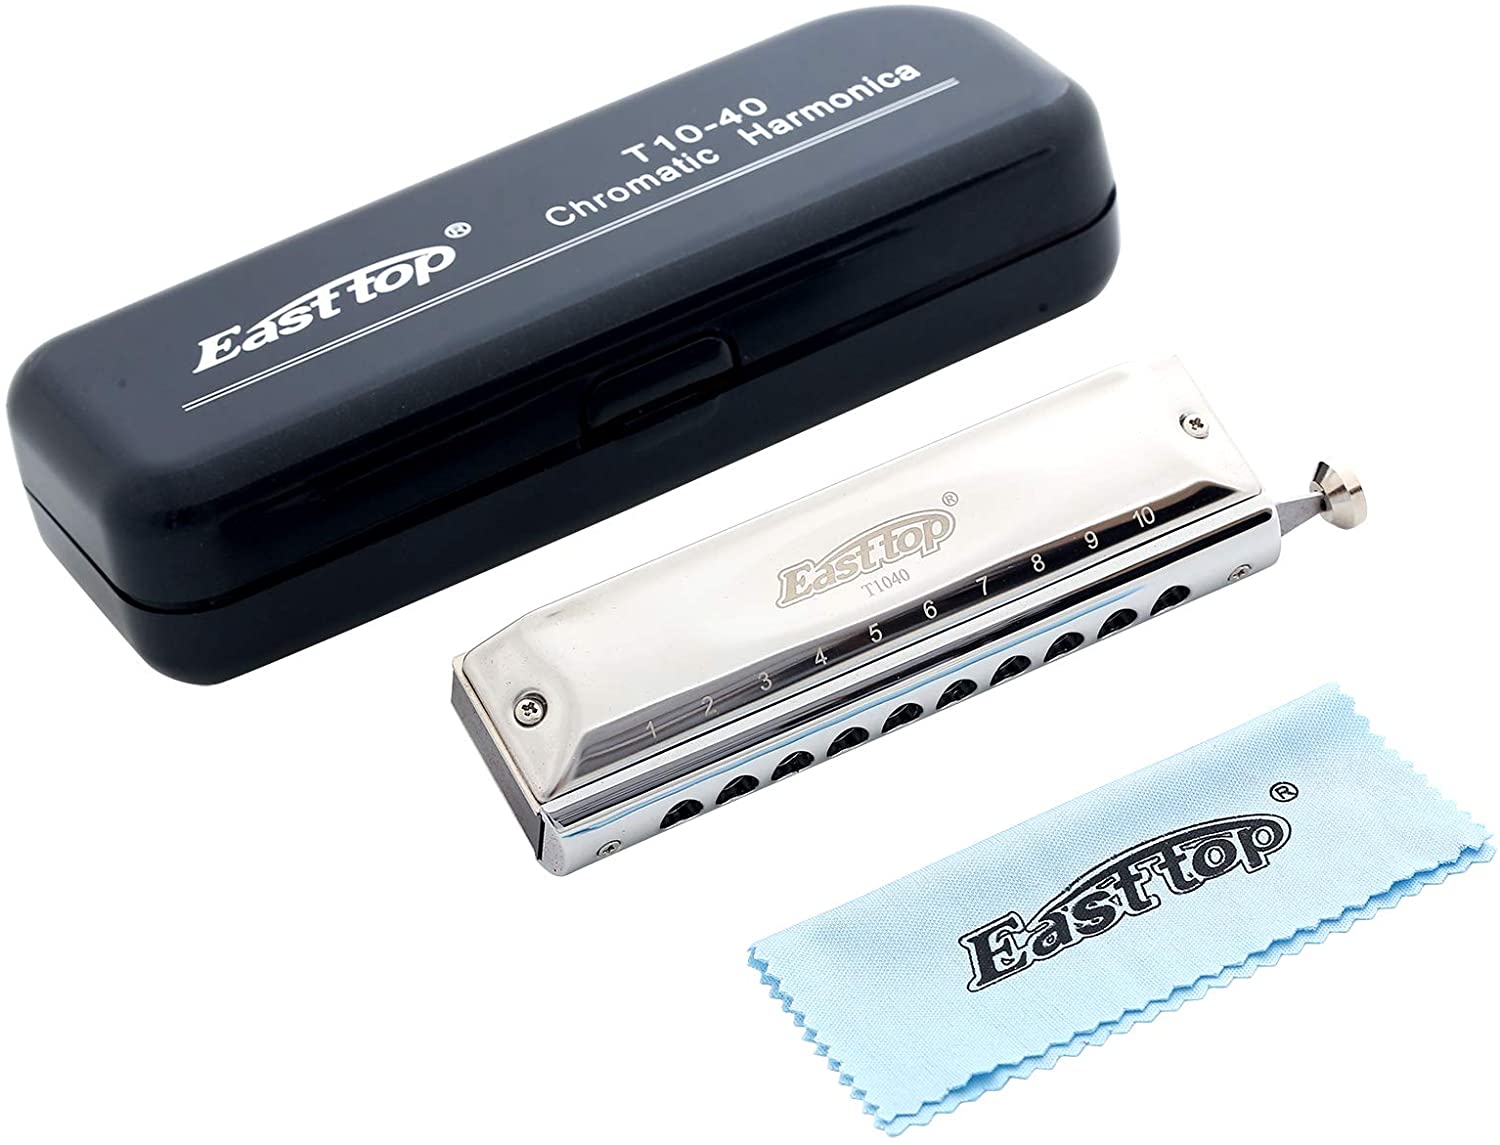 East top 10 Holes 40 Tones Professional Chromatic Harmonica Key of C, Harmonica for Adults, Professional Player and Students(T10-40) - Easttop harmonica